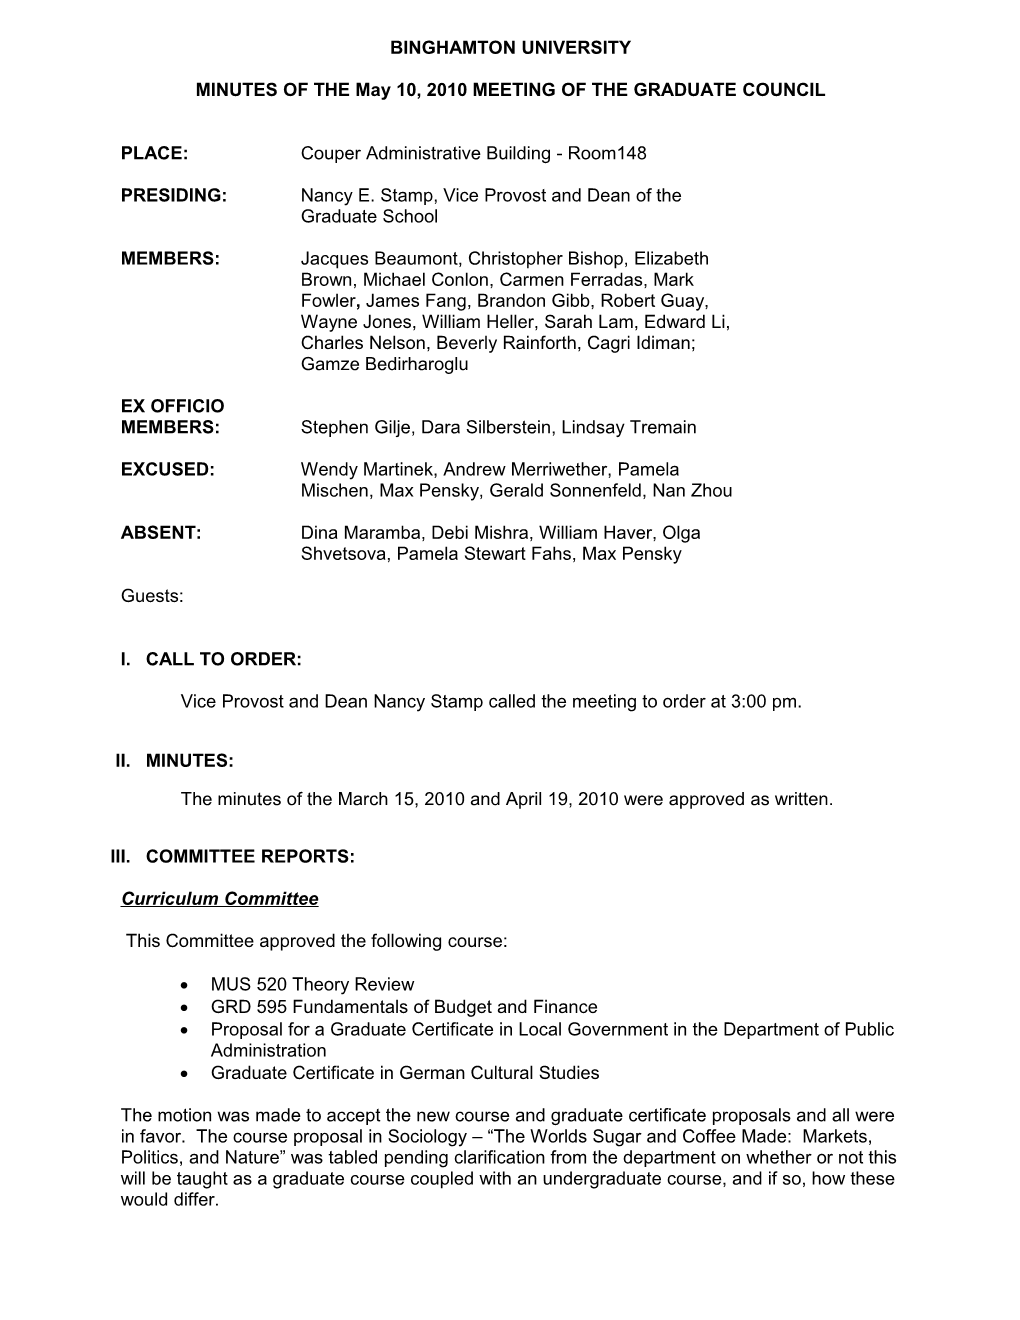 MINUTES of the May 10, 2010MEETING of the GRADUATE COUNCIL